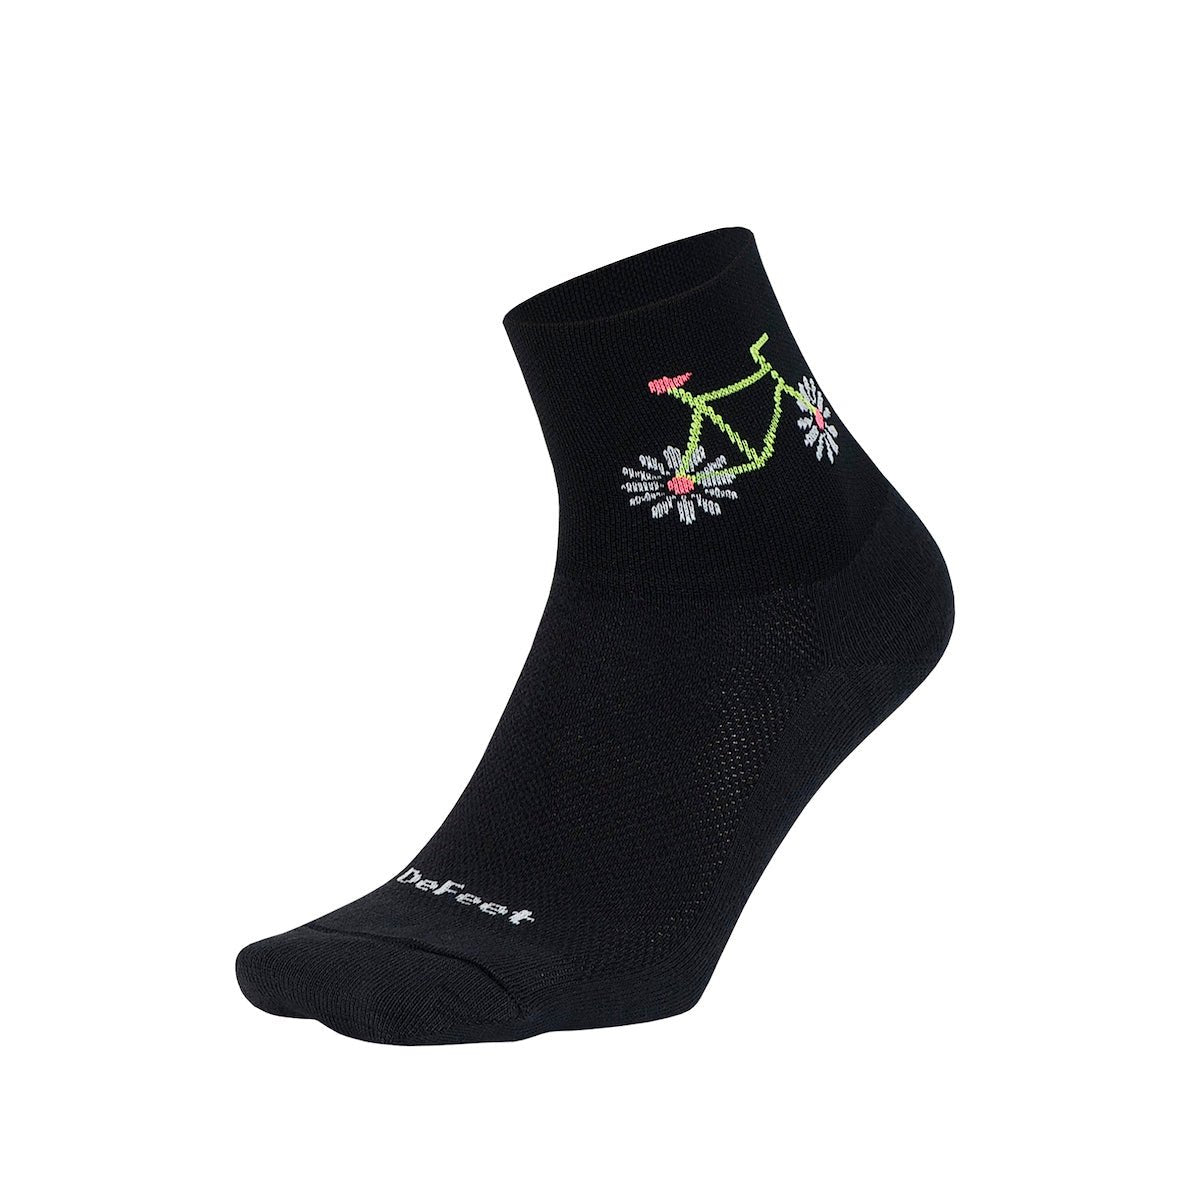 Aireator Women's 3" Pedal Power - DeFeet